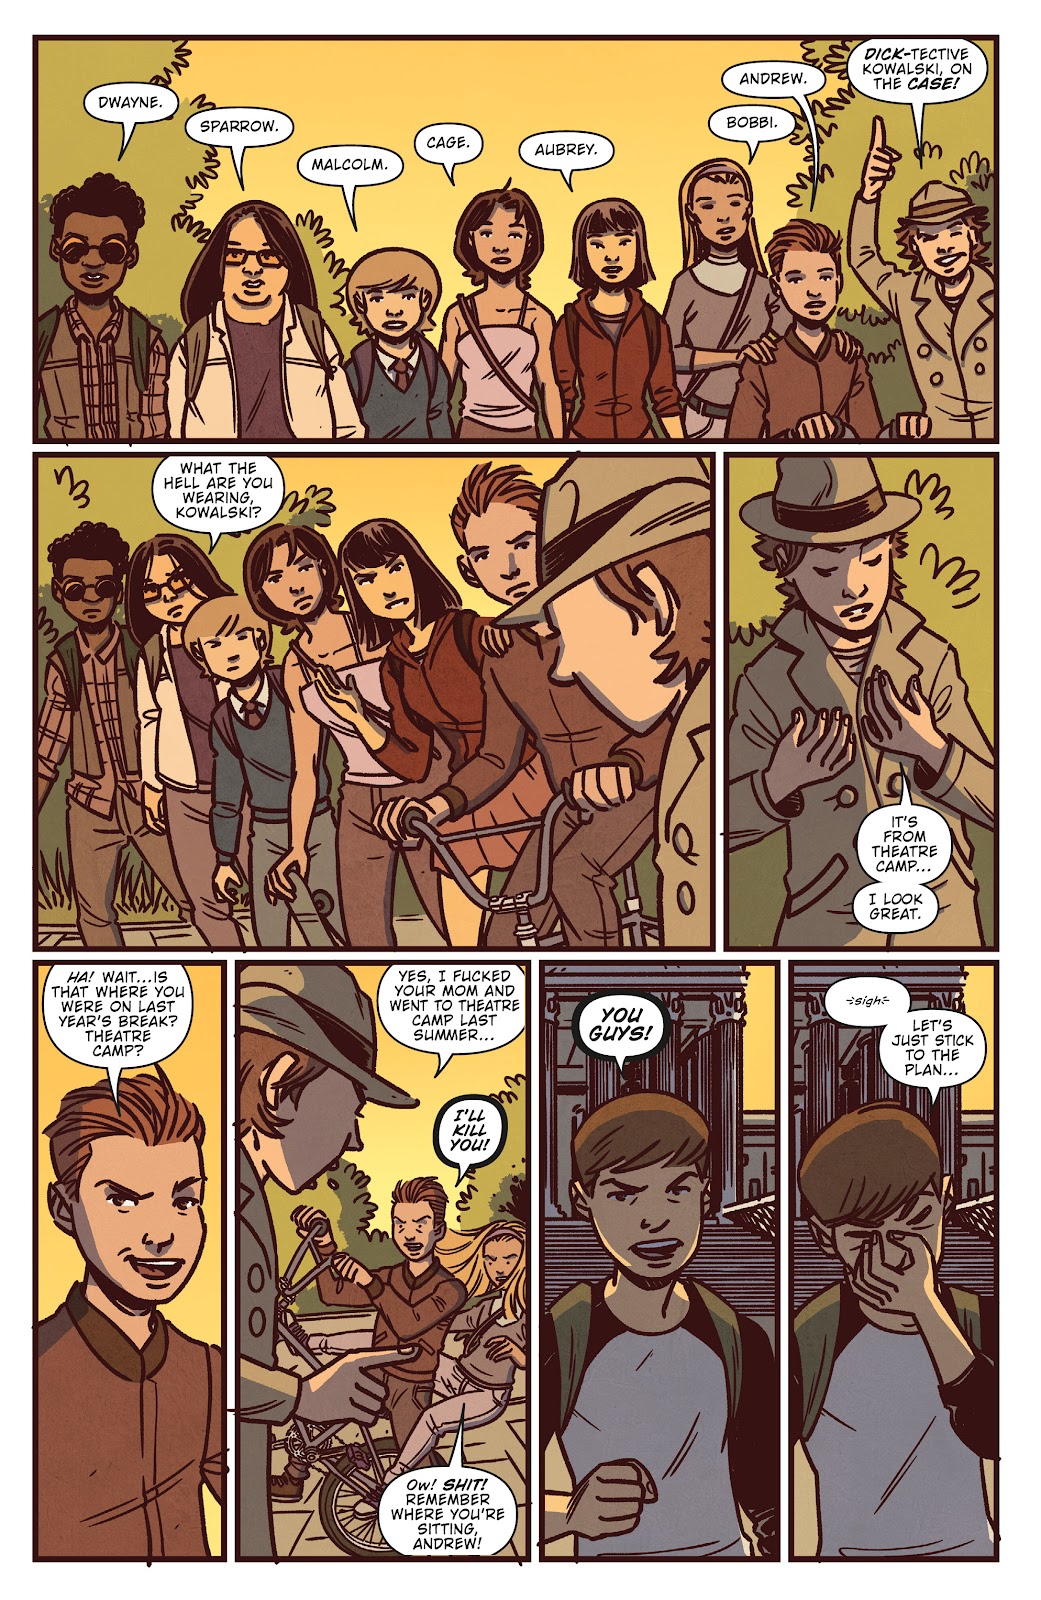 Cult Classic: Return to Whisper issue 2 & 3 - Page 4